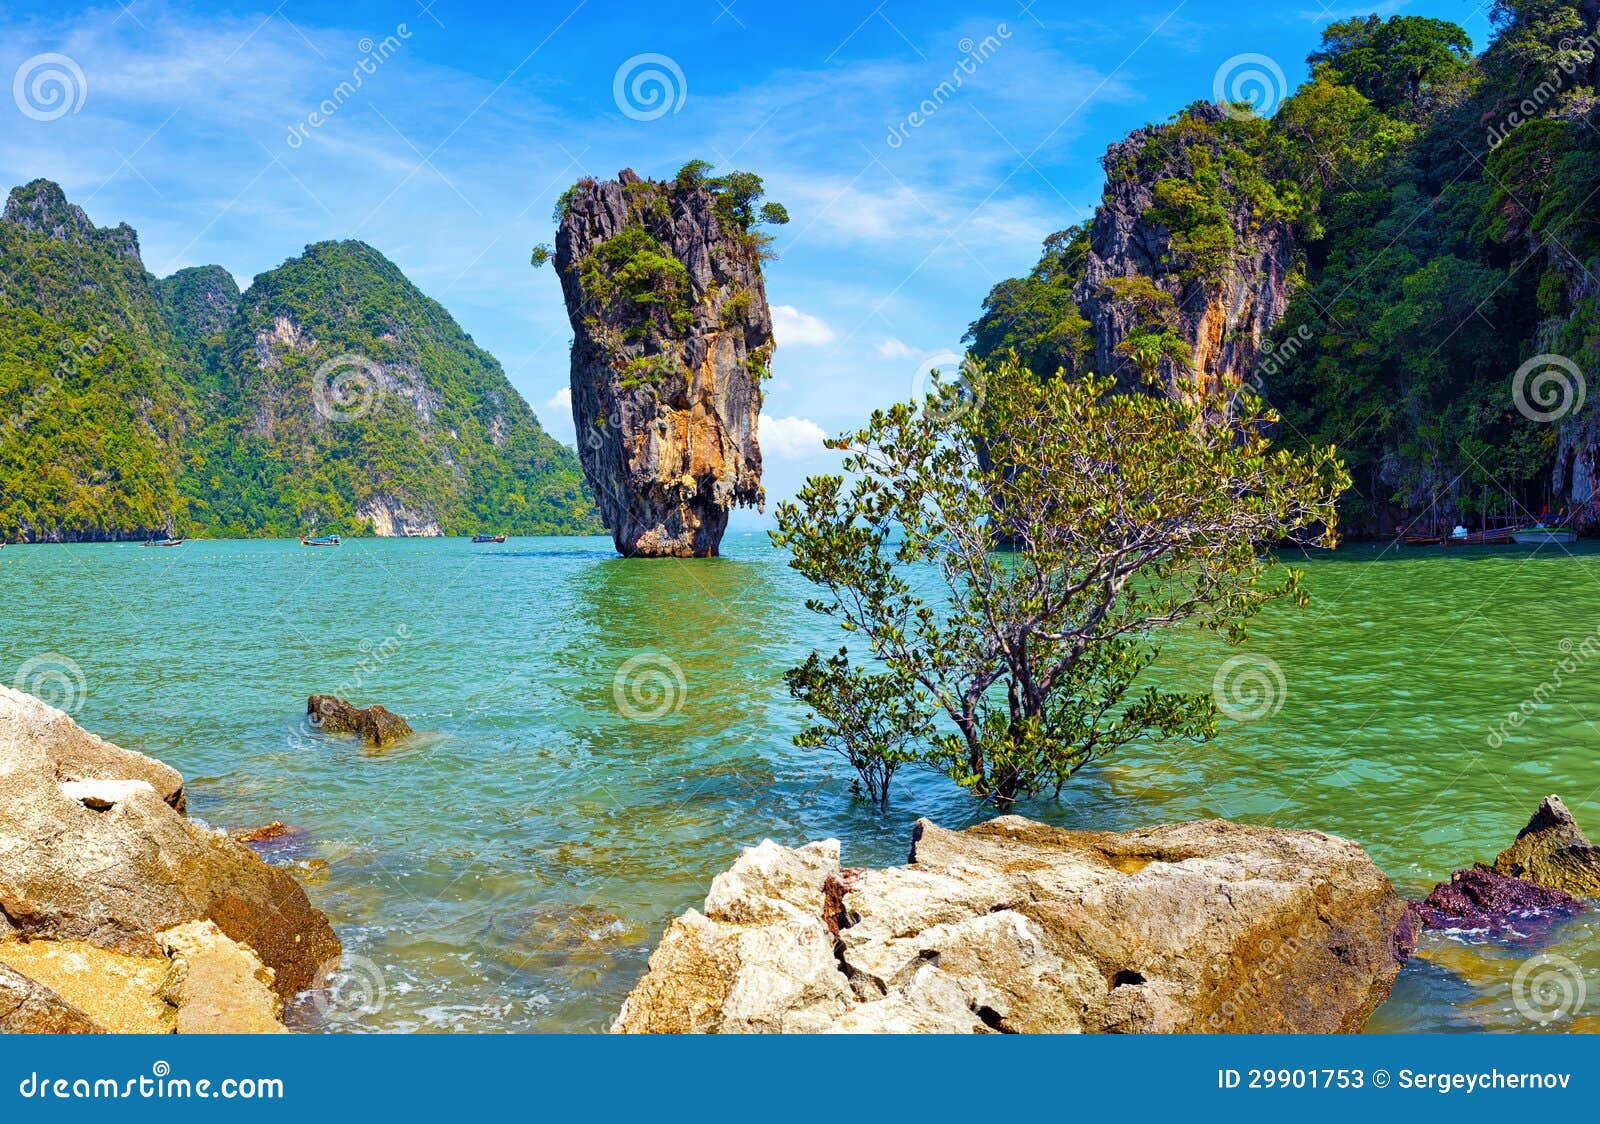 James Bond Island View Tropical Landscape Stock Image - Image of clear ...